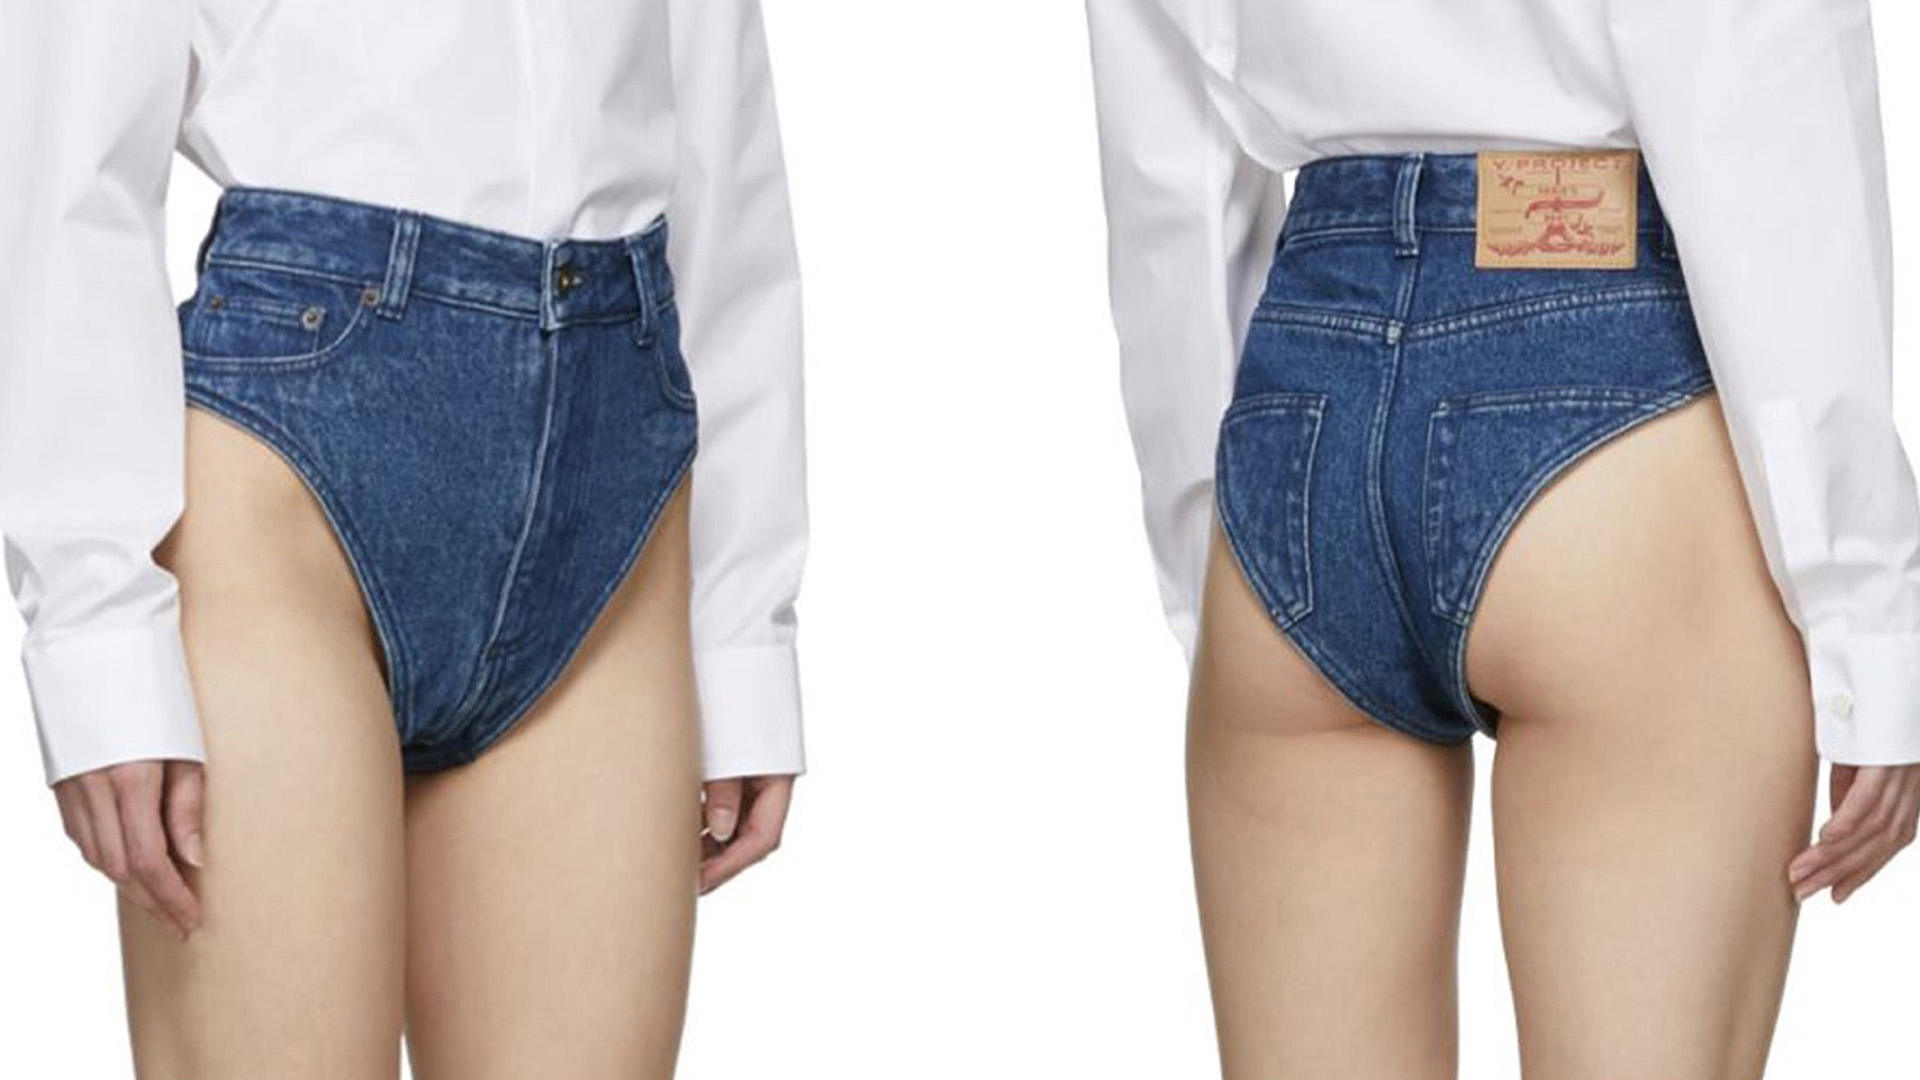 La marque francaise Y-Project propose une gamme de culottes en jeans Parisian fashion label Y/Project has just launched a polarizing piece of clothing that is probably going to be a big talking point in 2019: "denim panties".